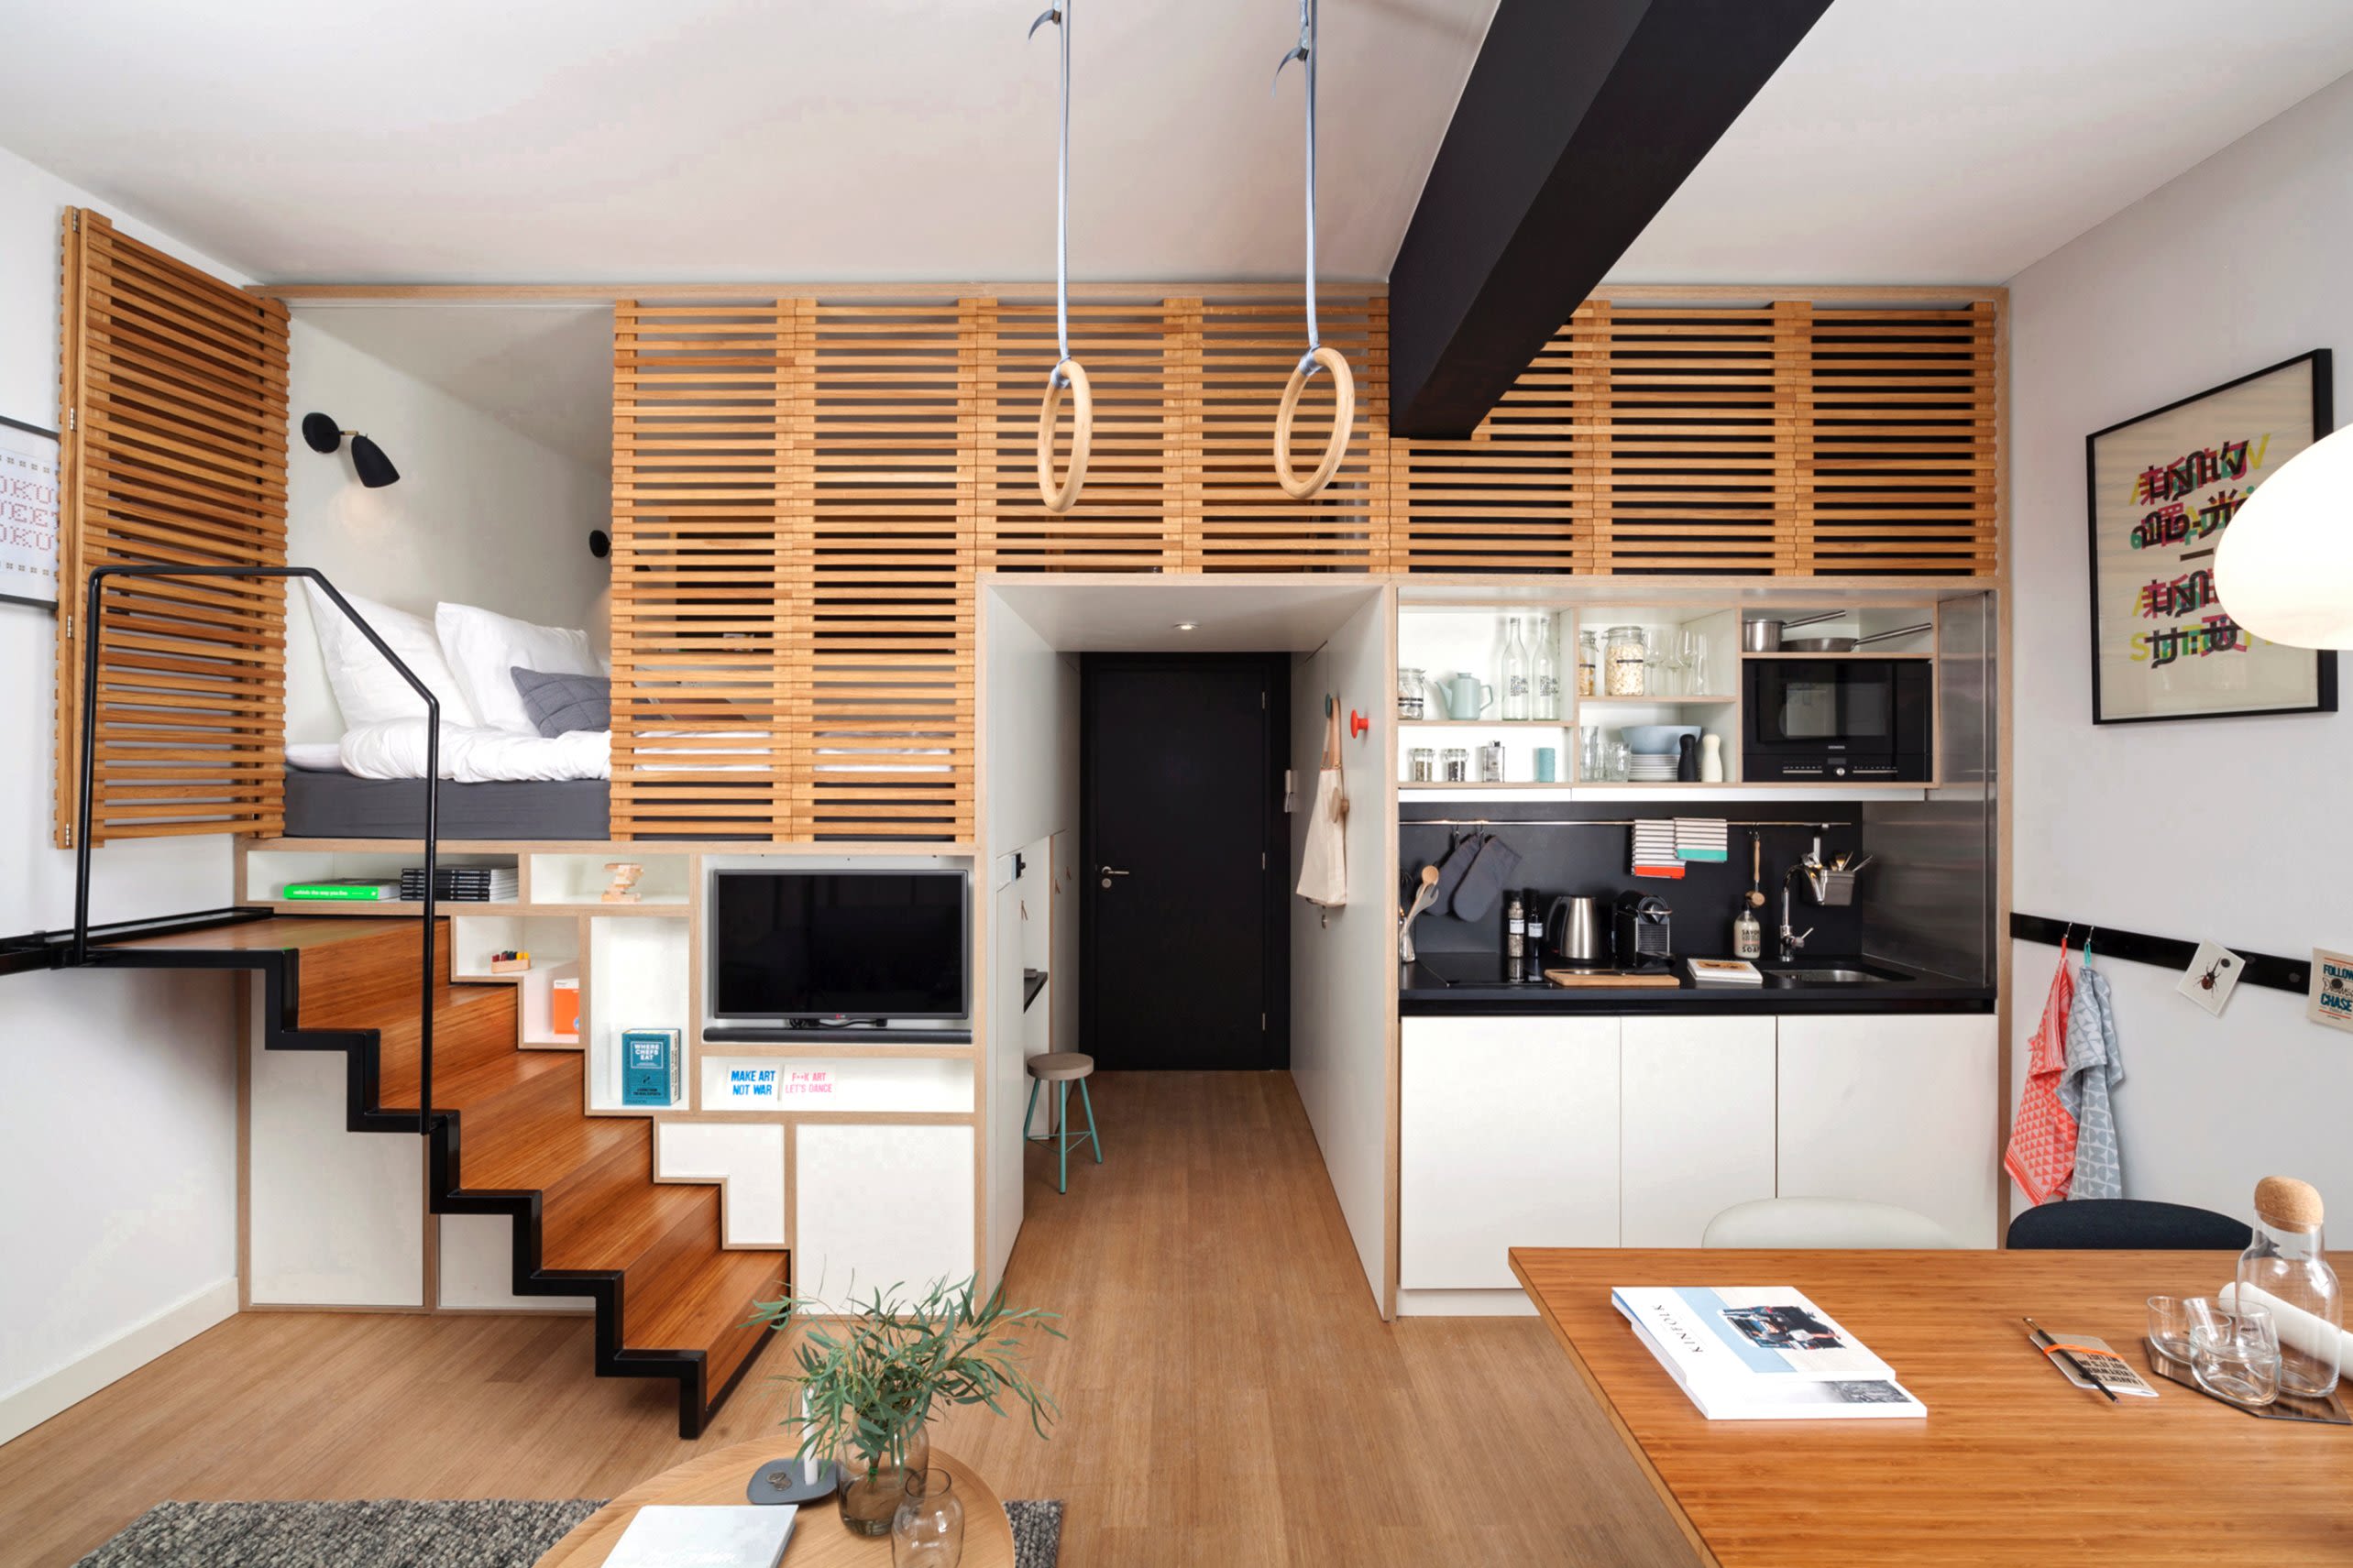 House & Home - 10 Small Spaces Around The World With Genius Design